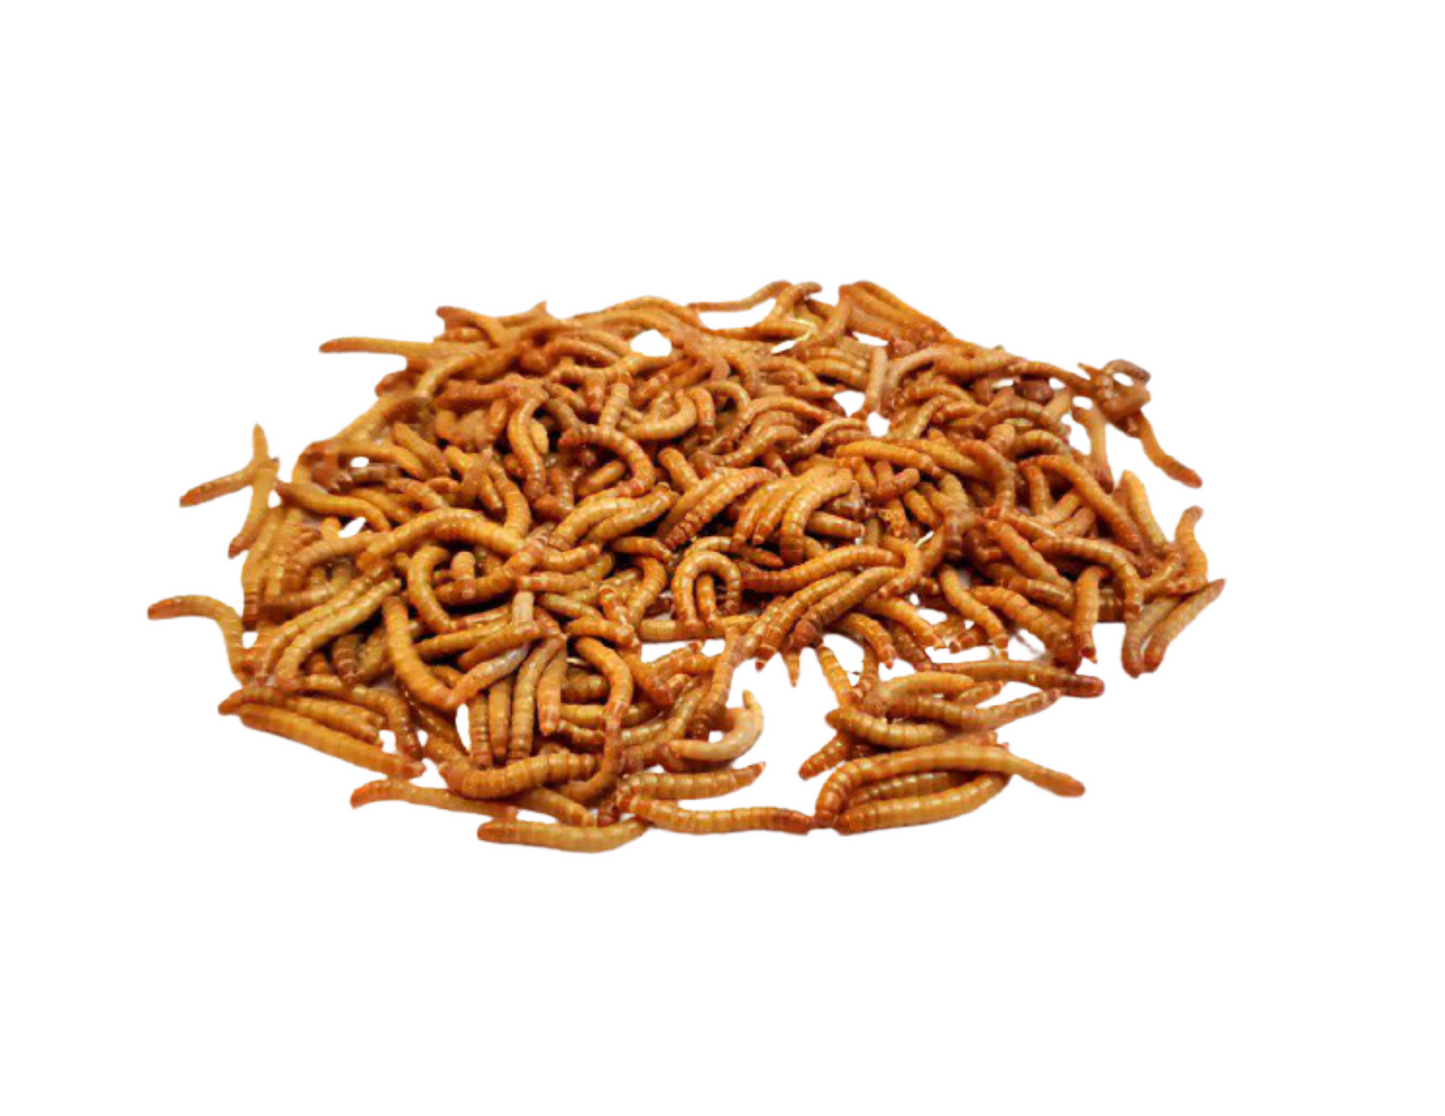 Large Mealworms Organic Mealworms